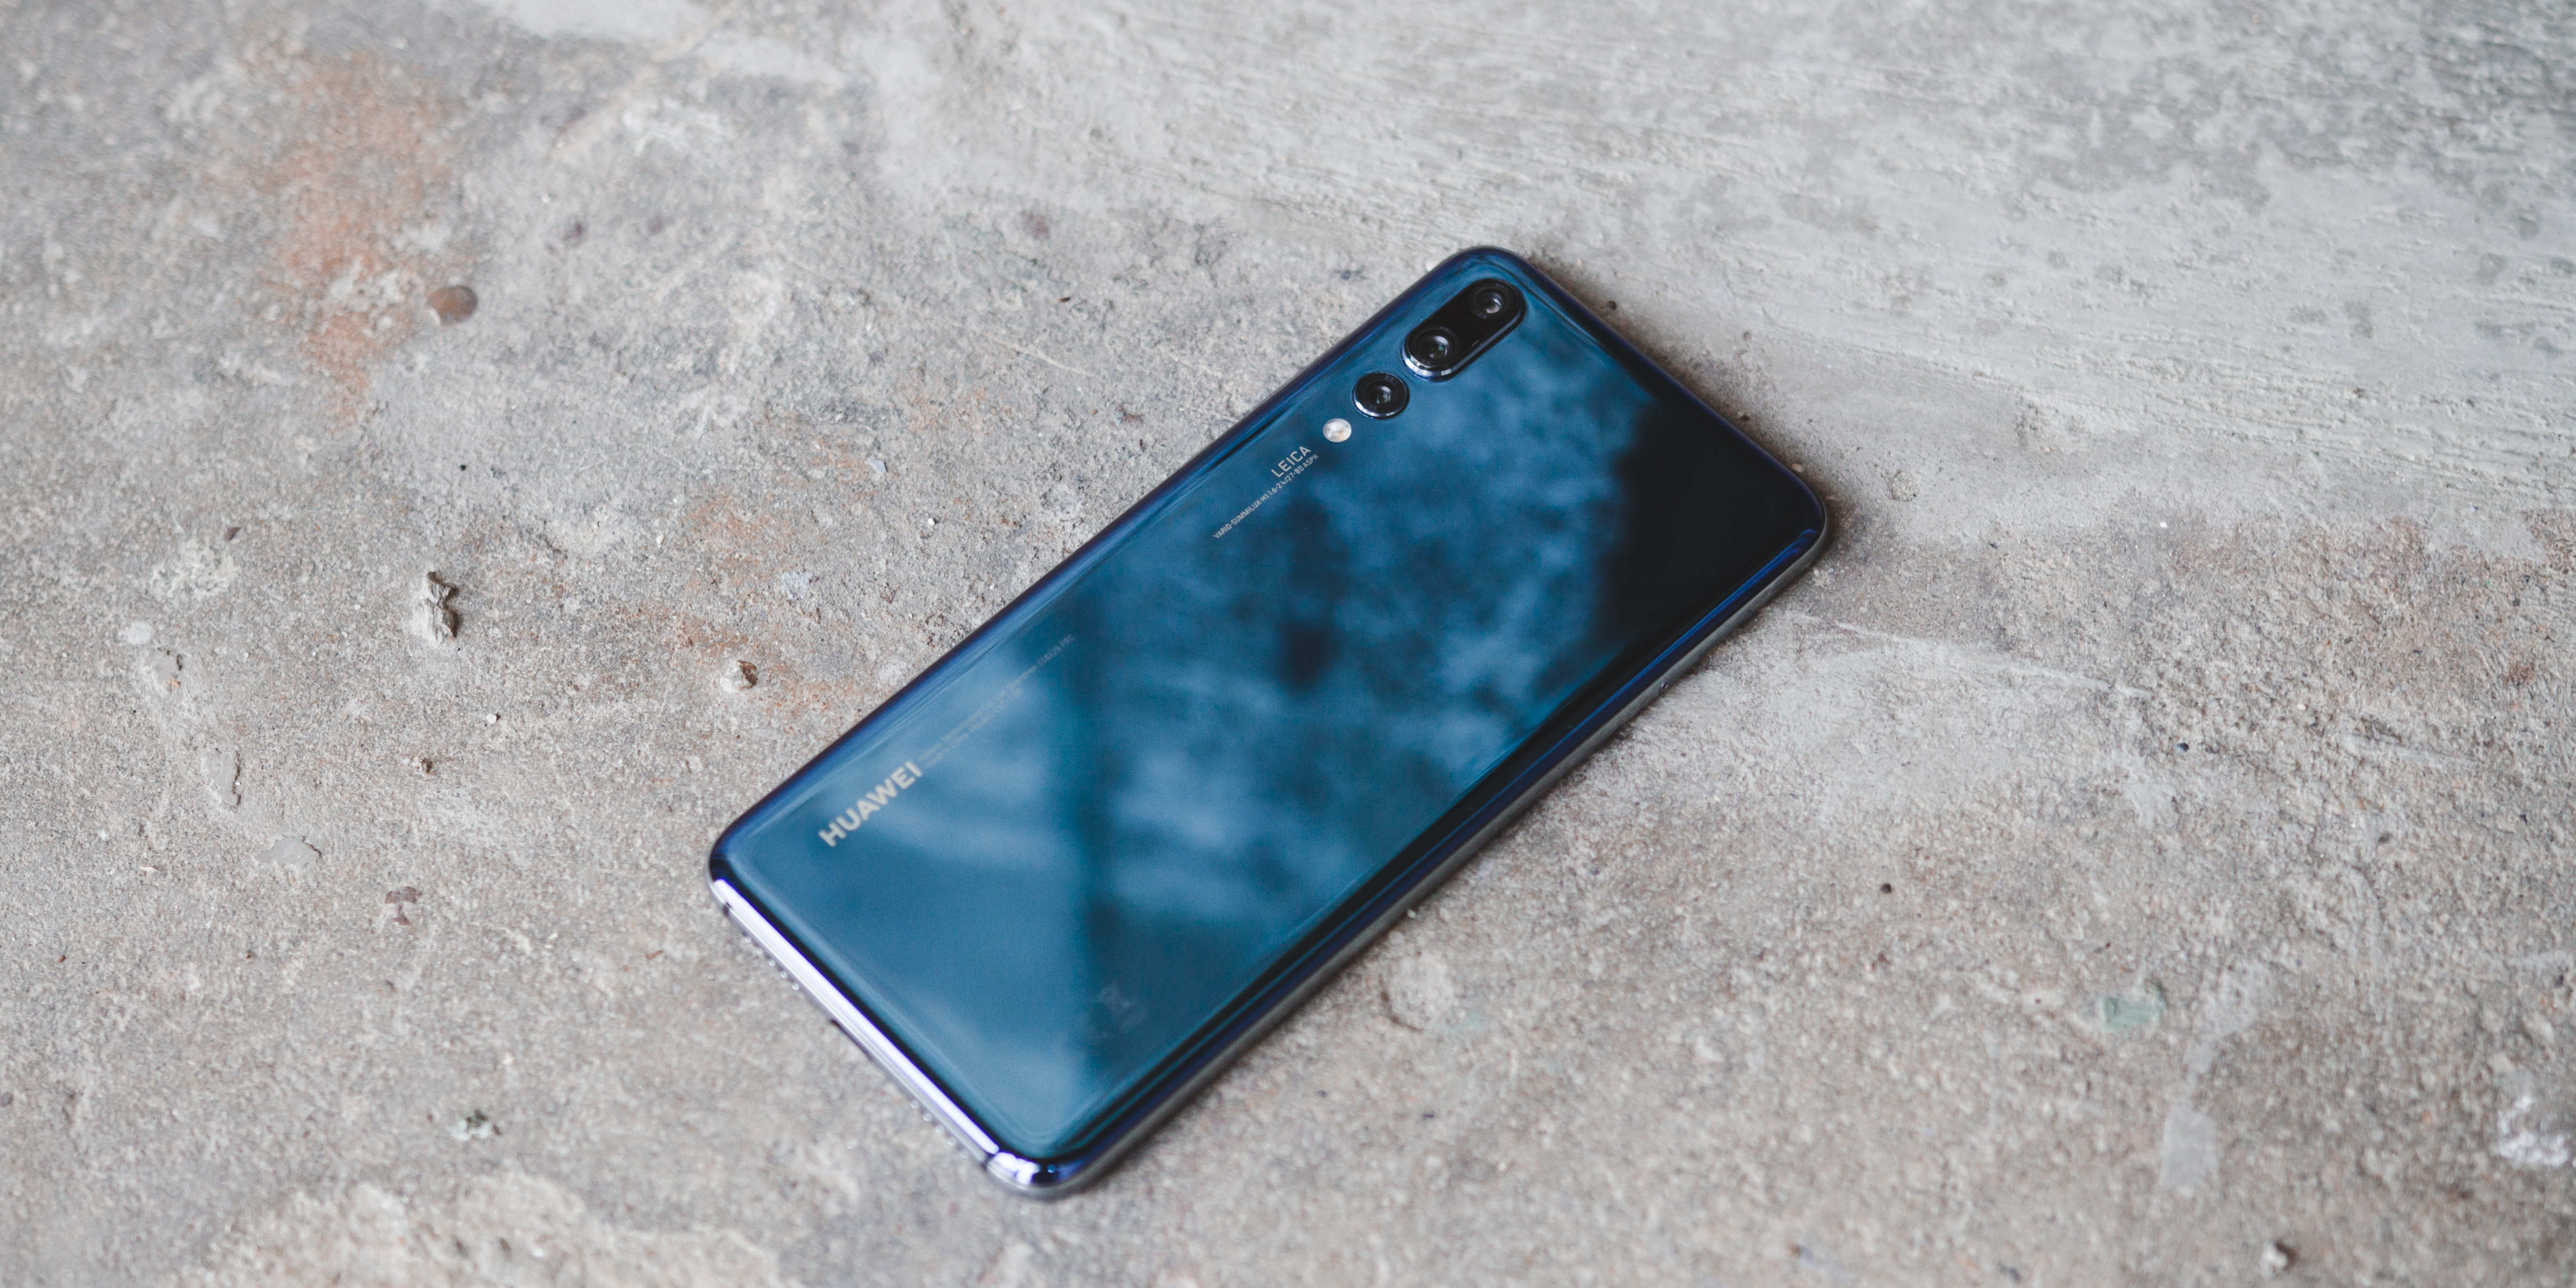 oase repertoire vervolgens Huawei P20 Pro Review: A game-changing camera on a stellar smartphone, w/  conditions